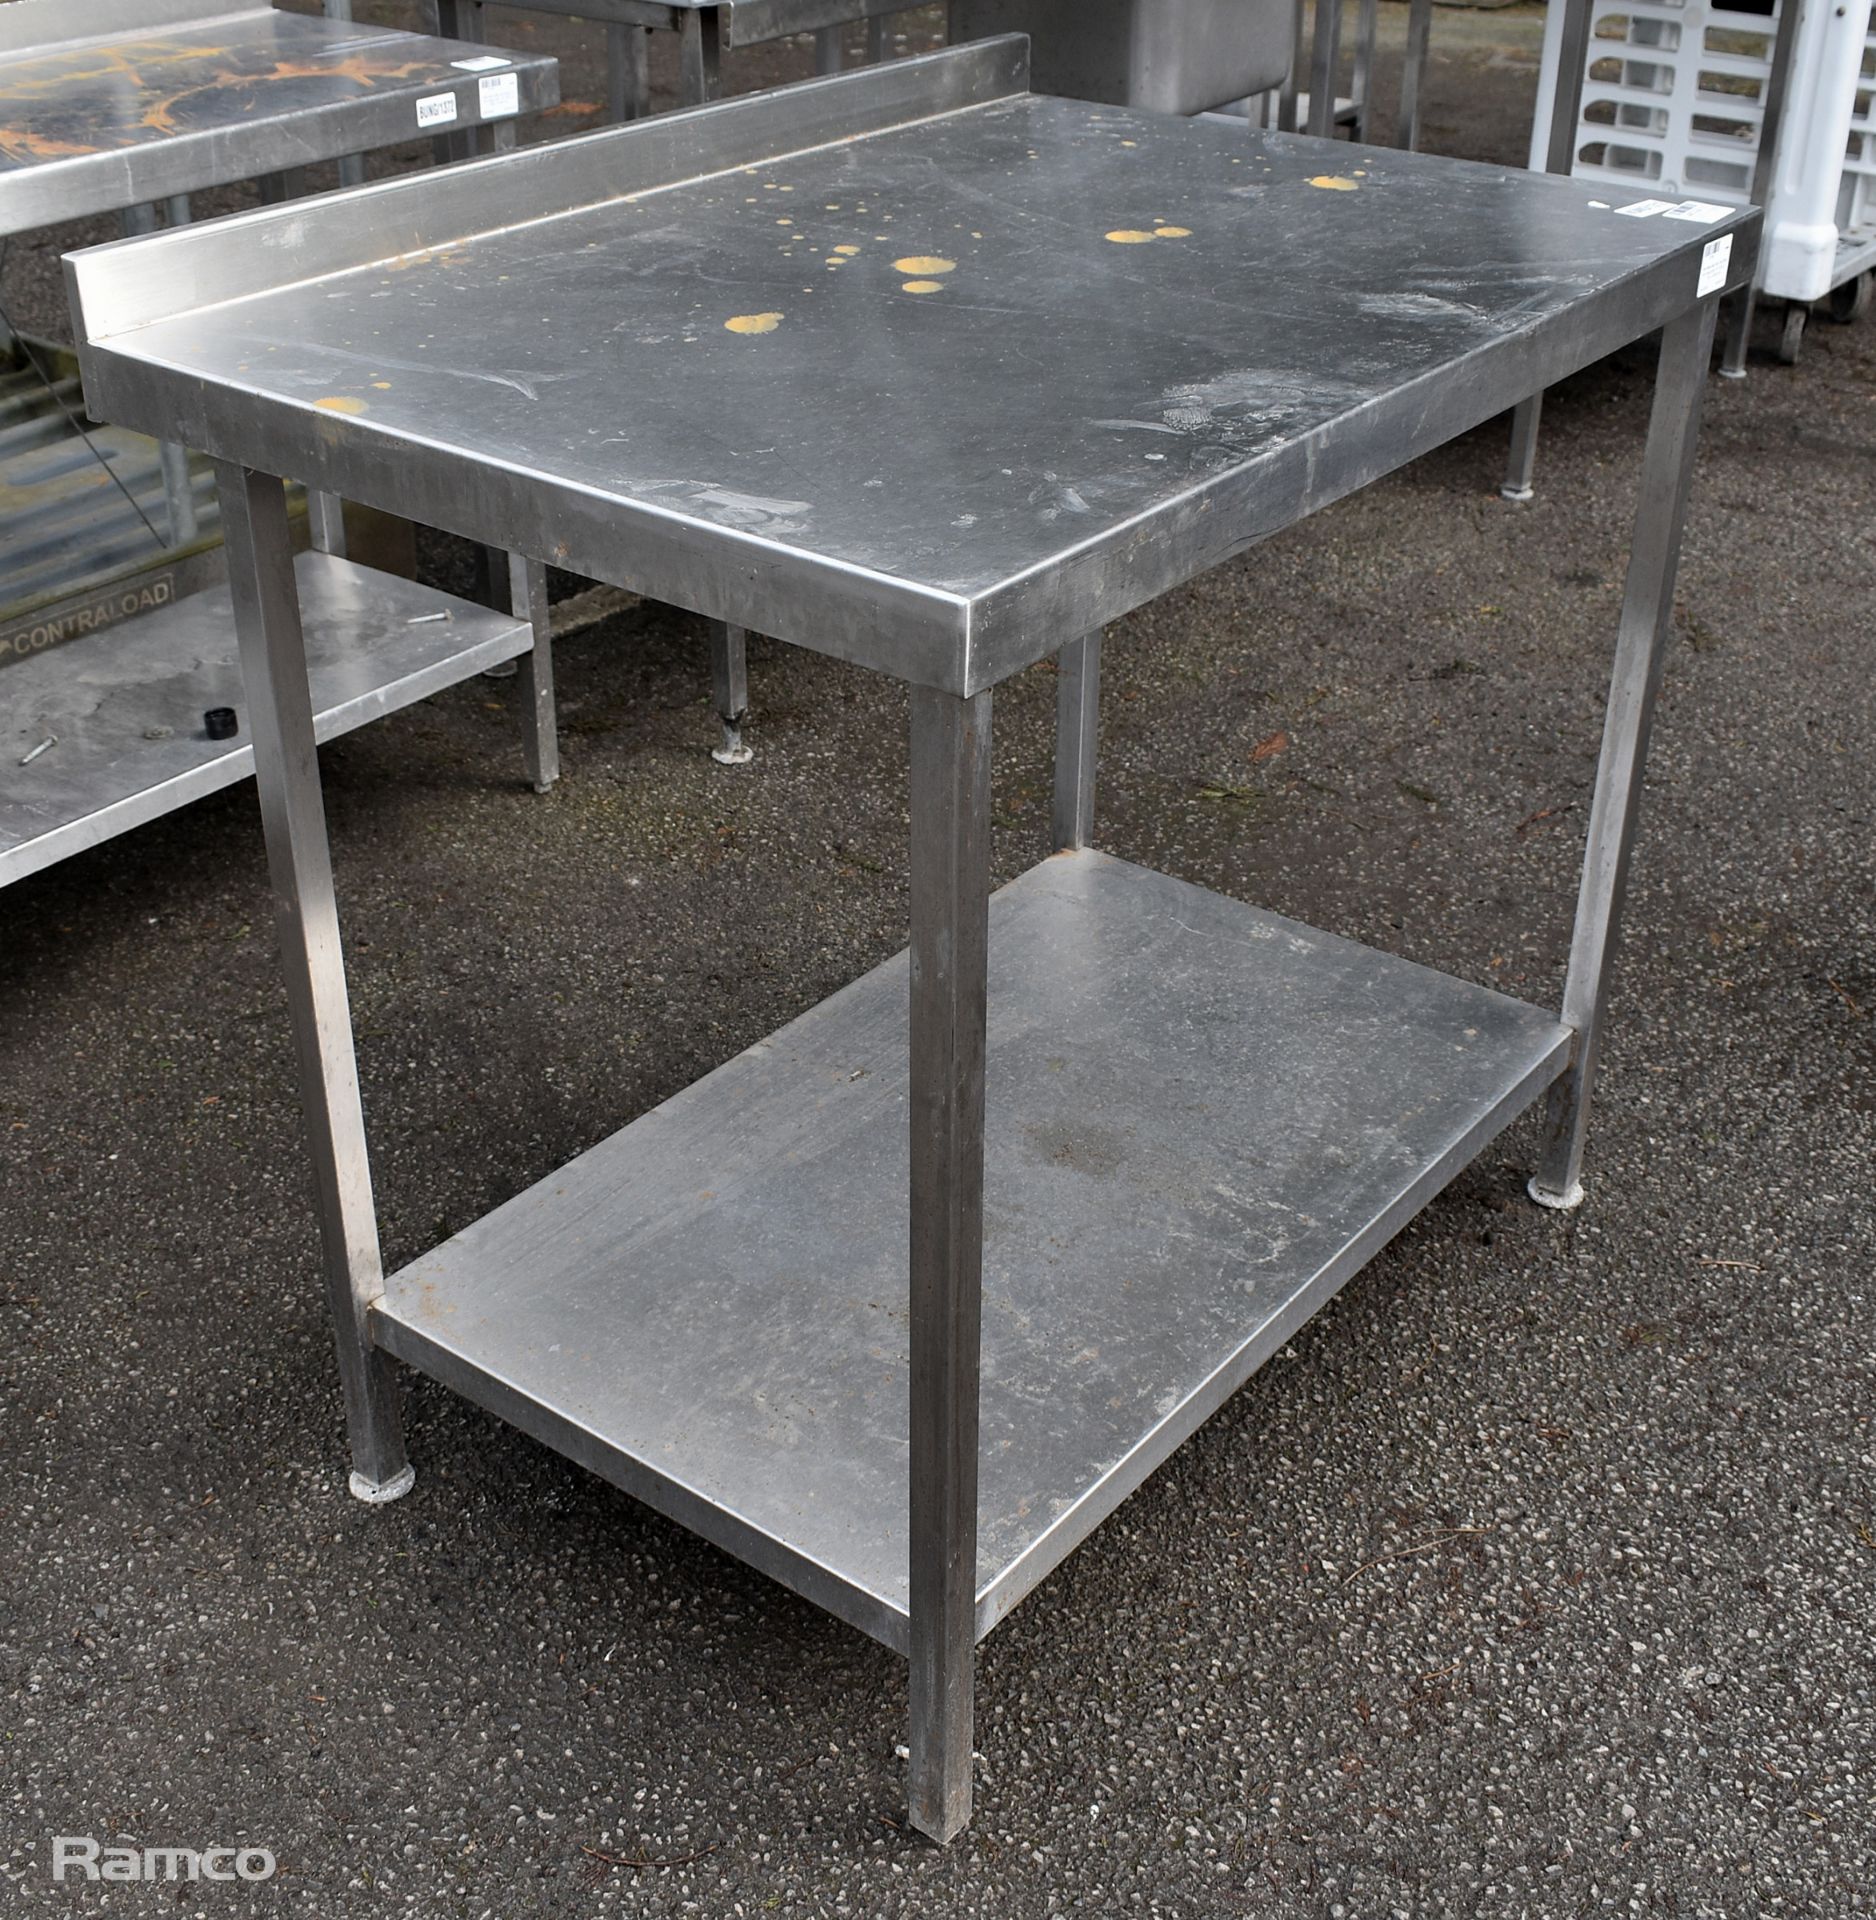 Stainless steel wall prep table with lower shelf - W 1000 x D 700 x H 950mm - Image 2 of 3